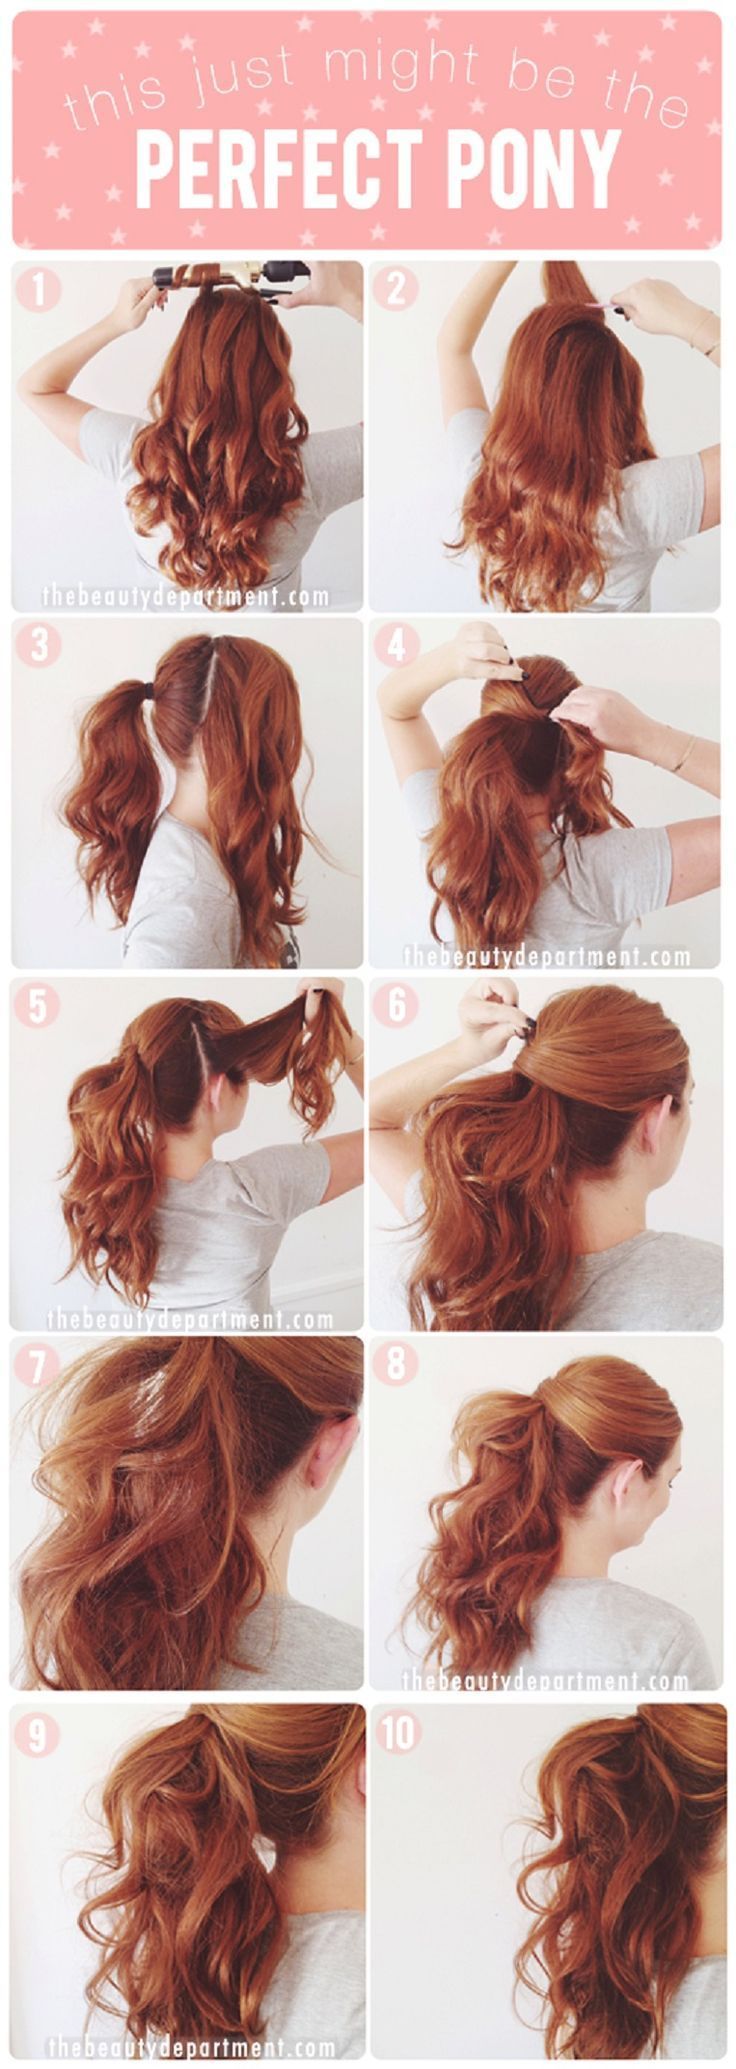 Lucy Hale’s VMA Ponytail Tutorial - 11 Runway-Ready Ponytail Tutorials for Eve...